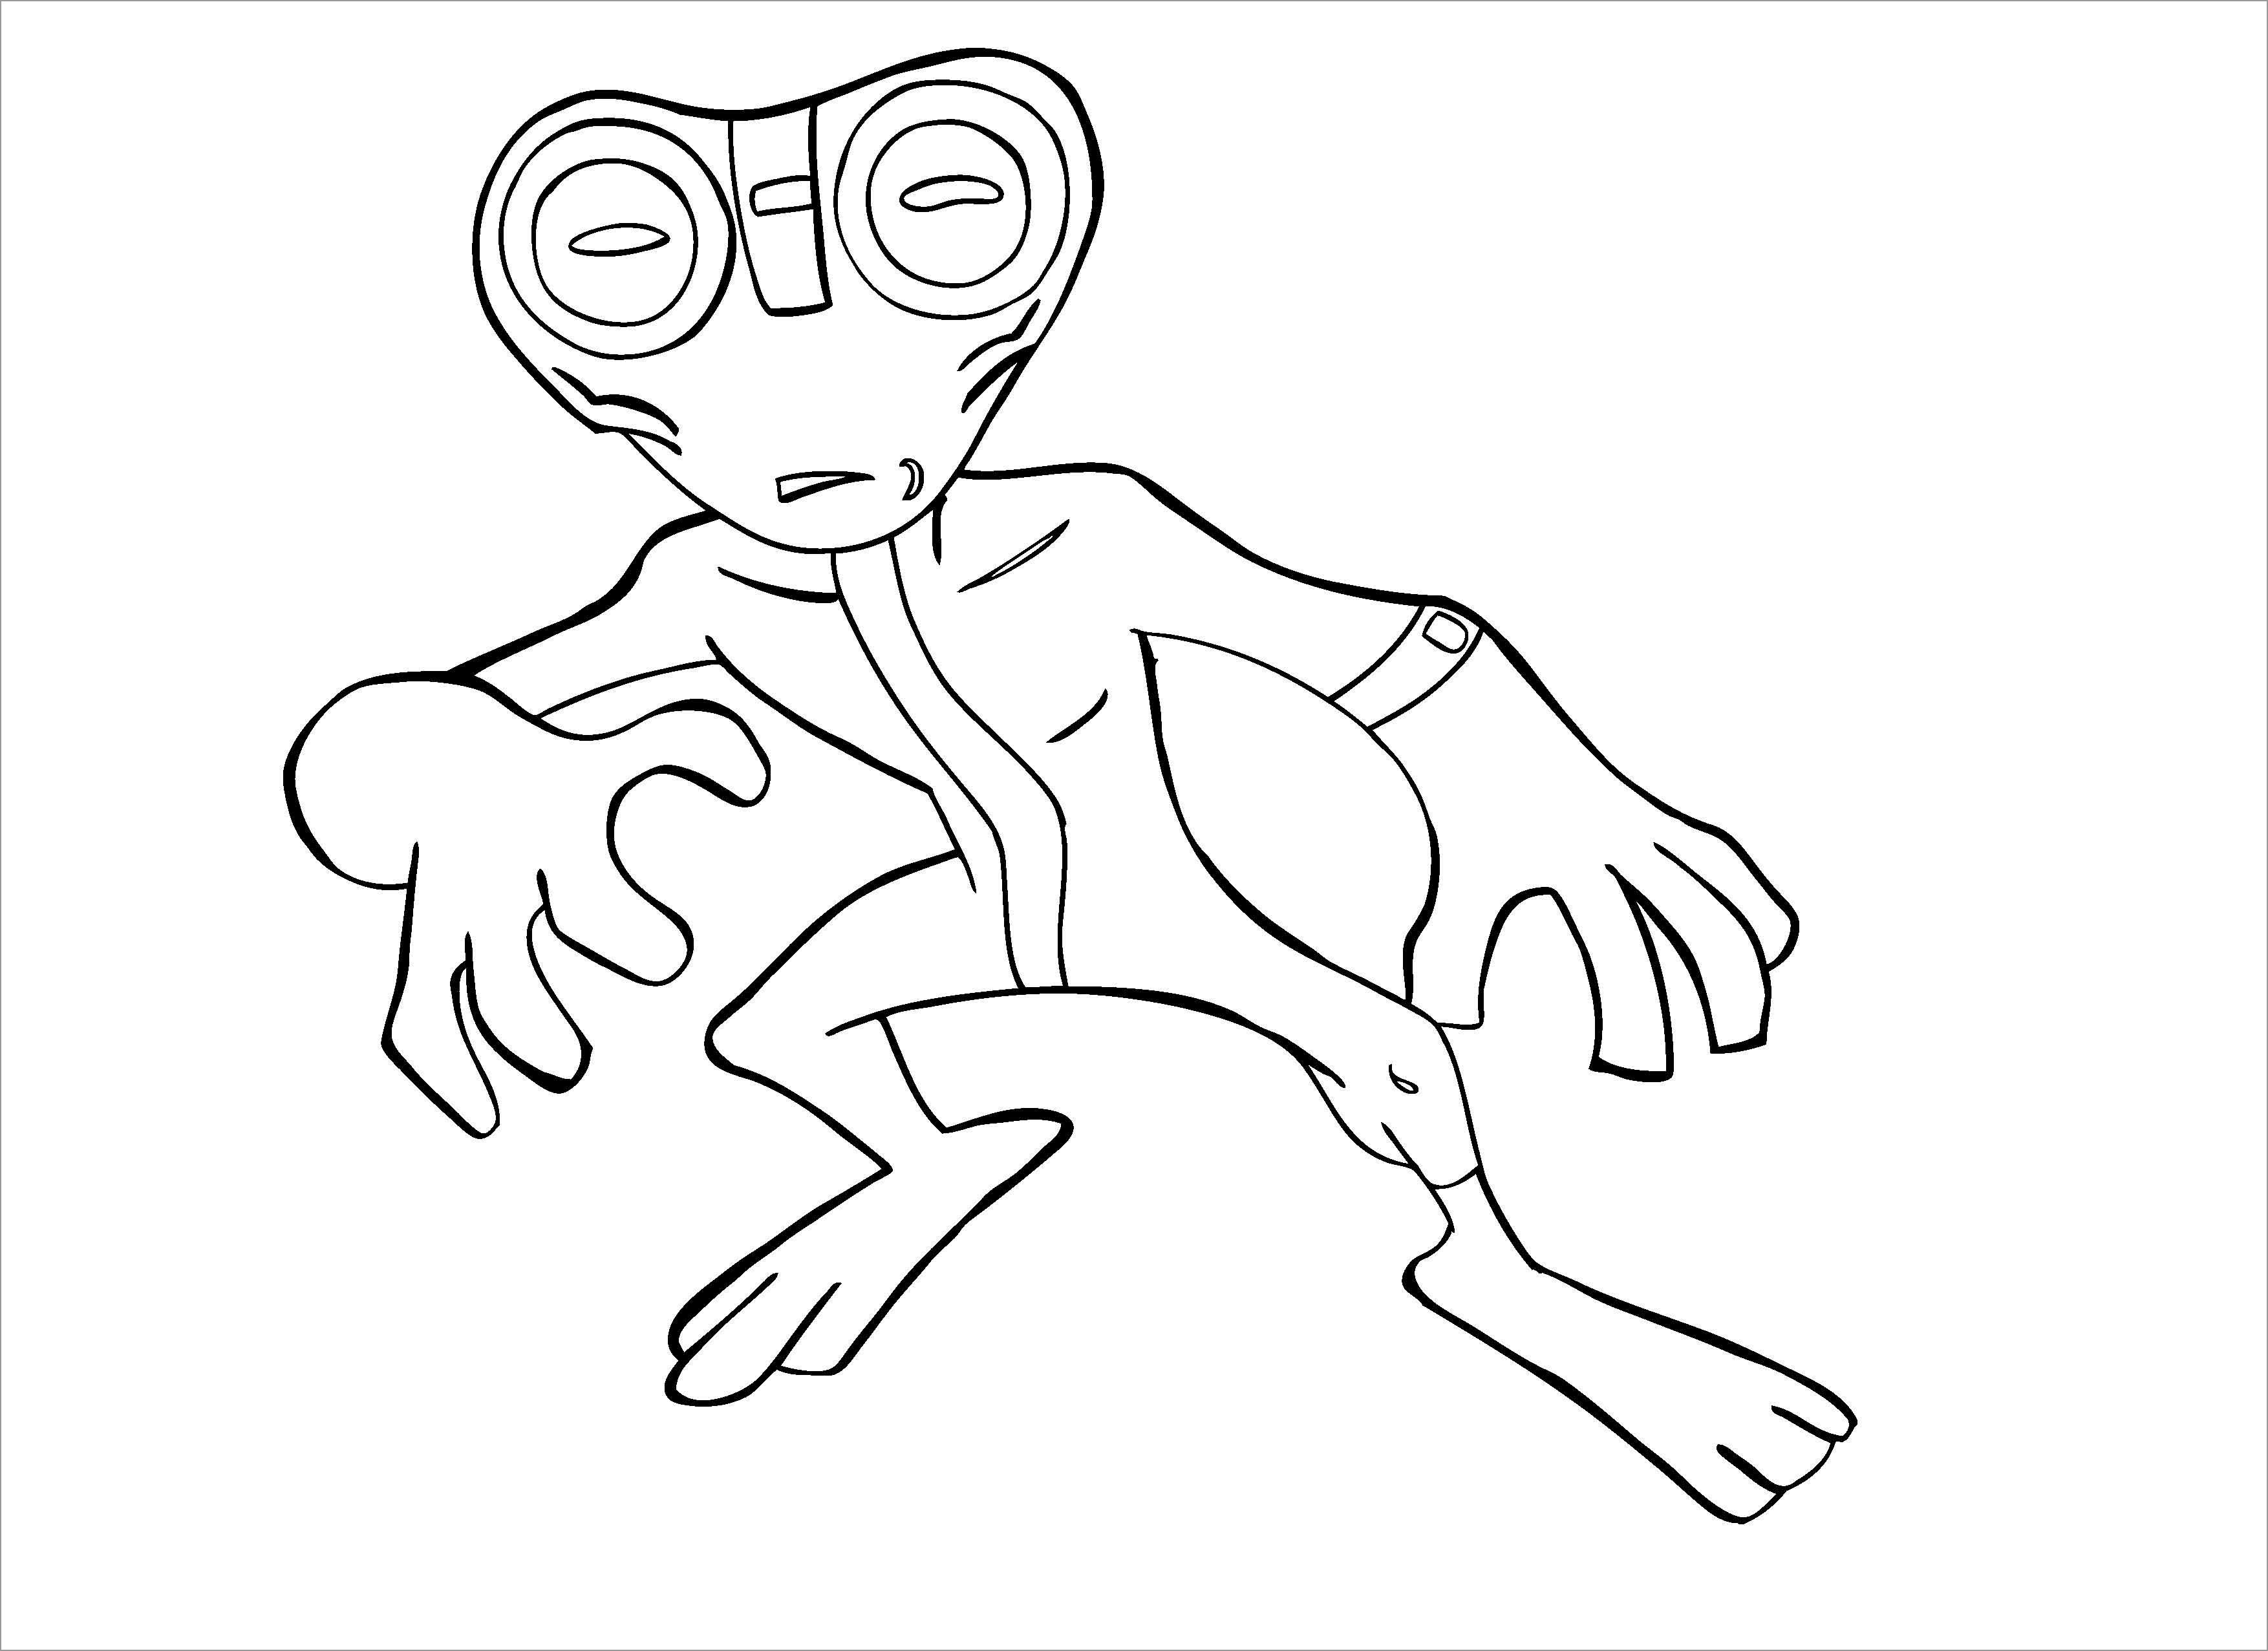 Alien Coloring Page to Print